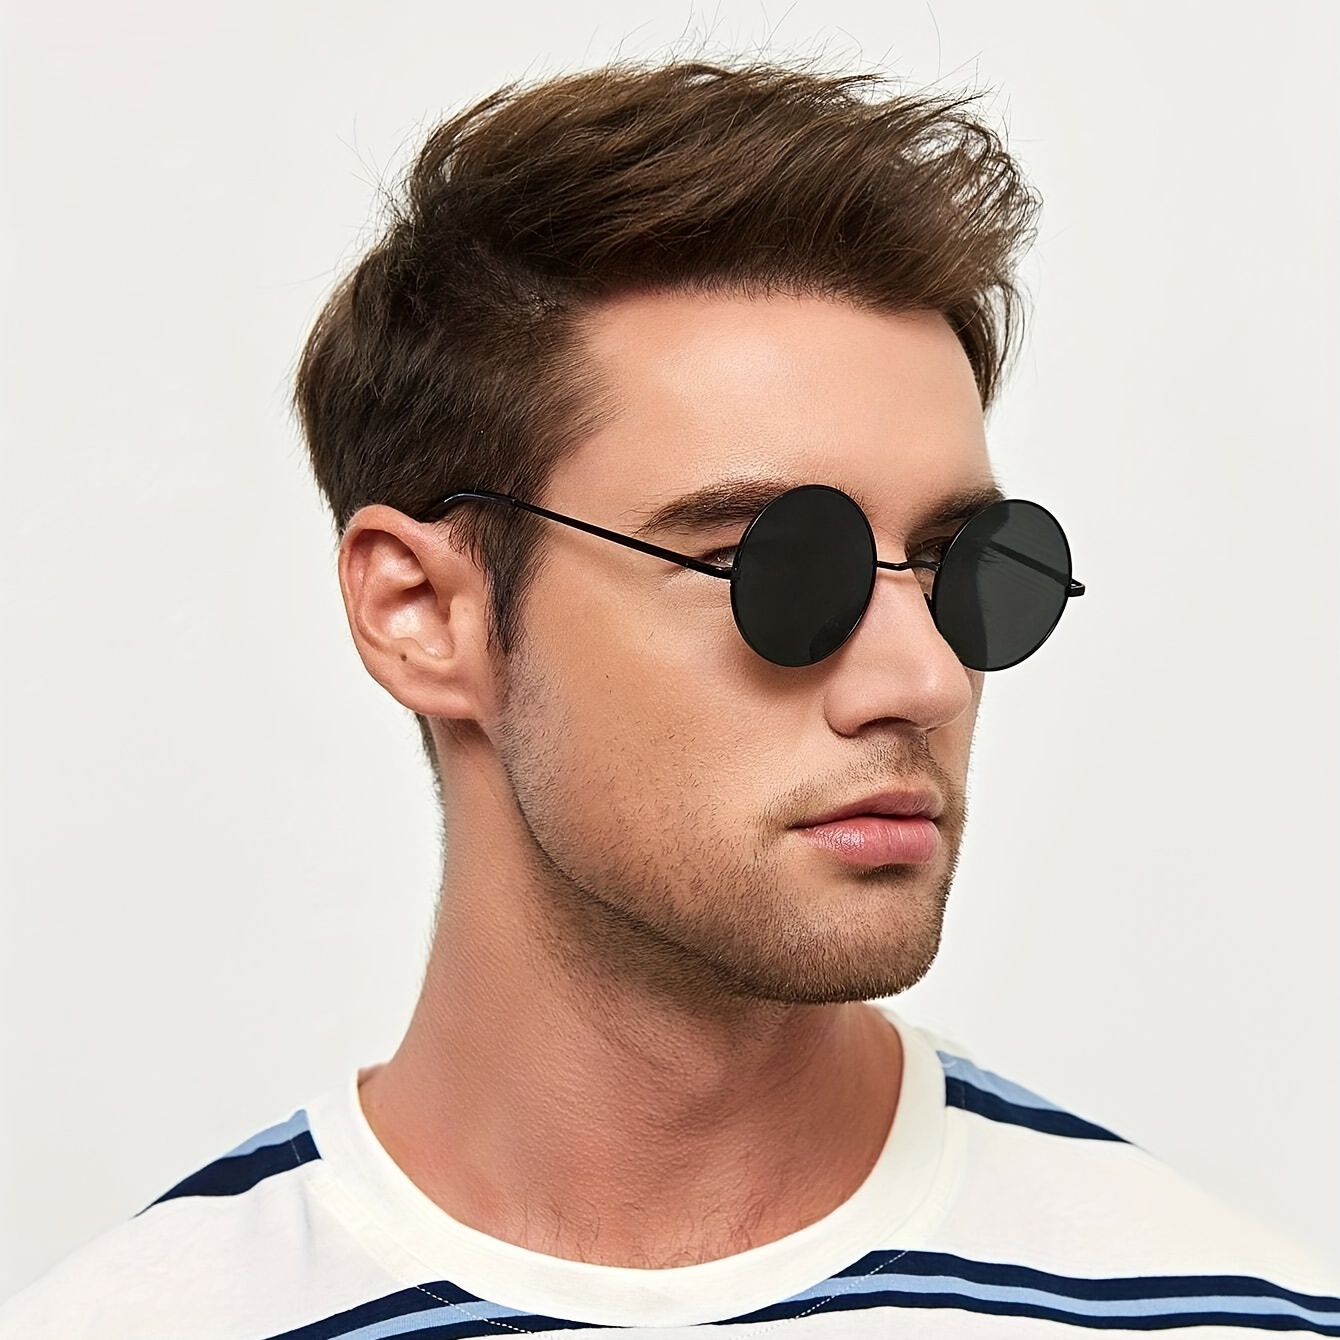 Men's Classic Casual Round Frame Sunglasses, ideal choice for gifts